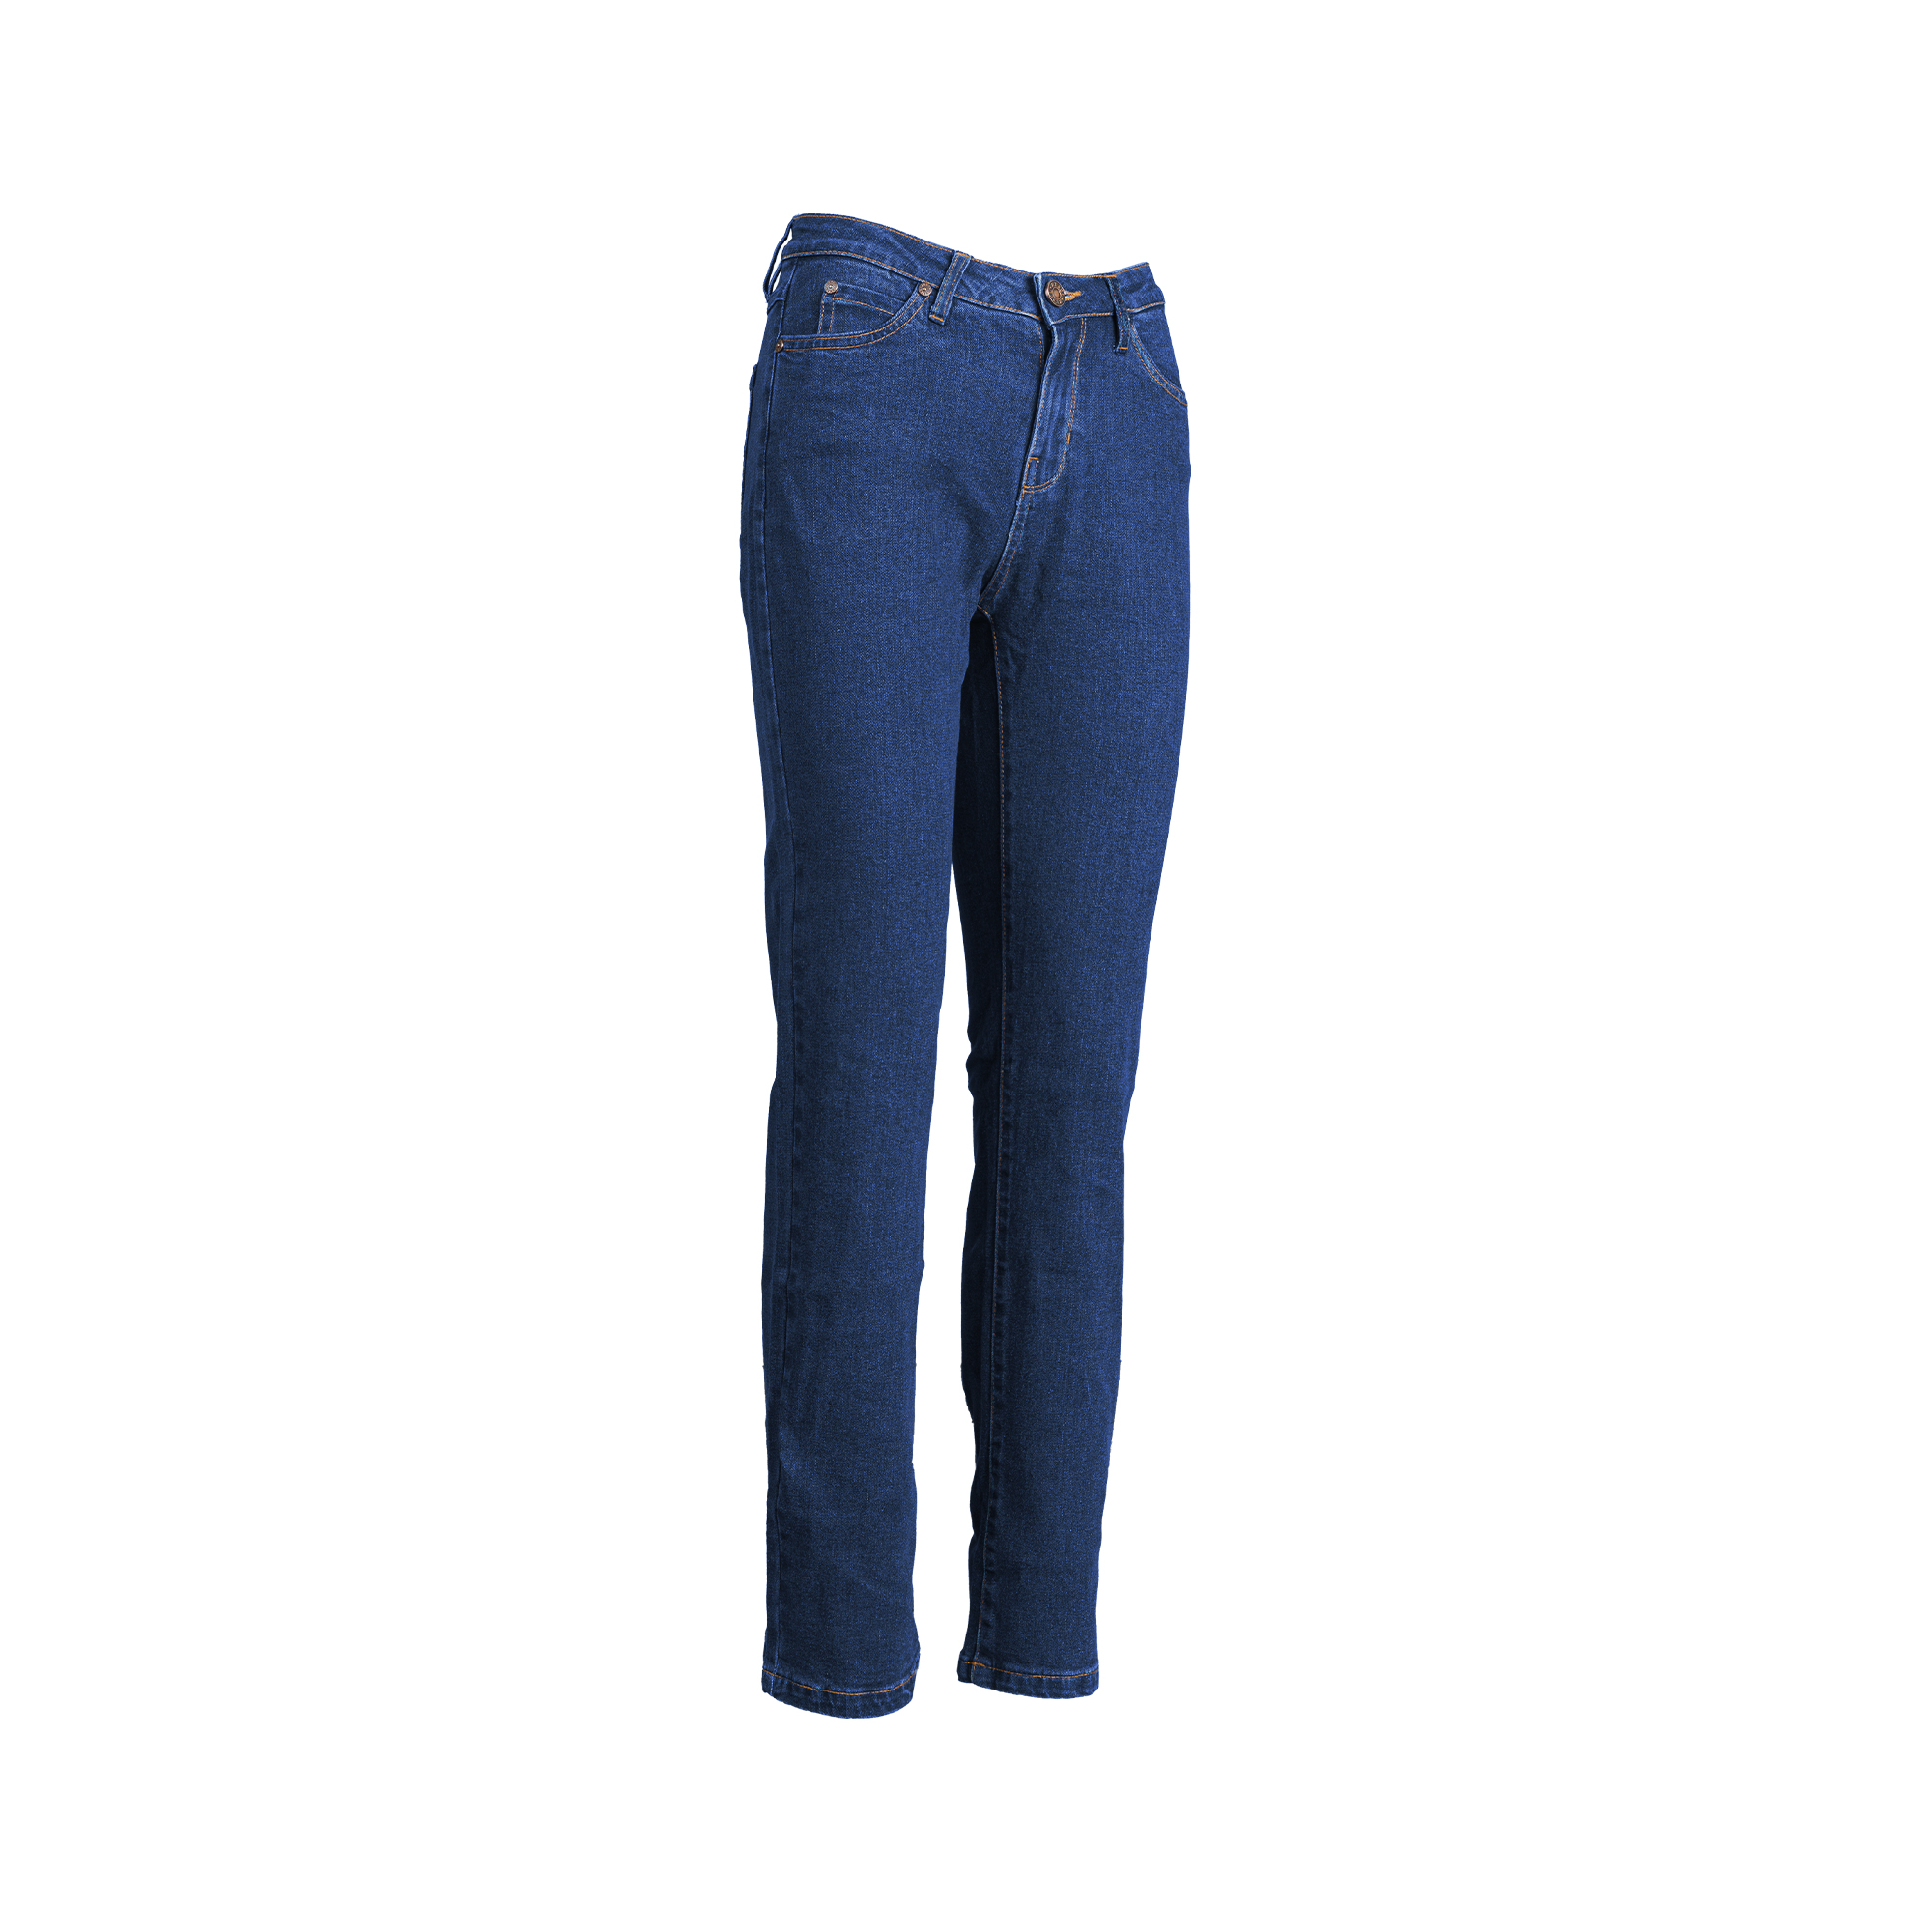 RSG_Workwear_Jeans_Womens_DarkBlue_Front_Angle